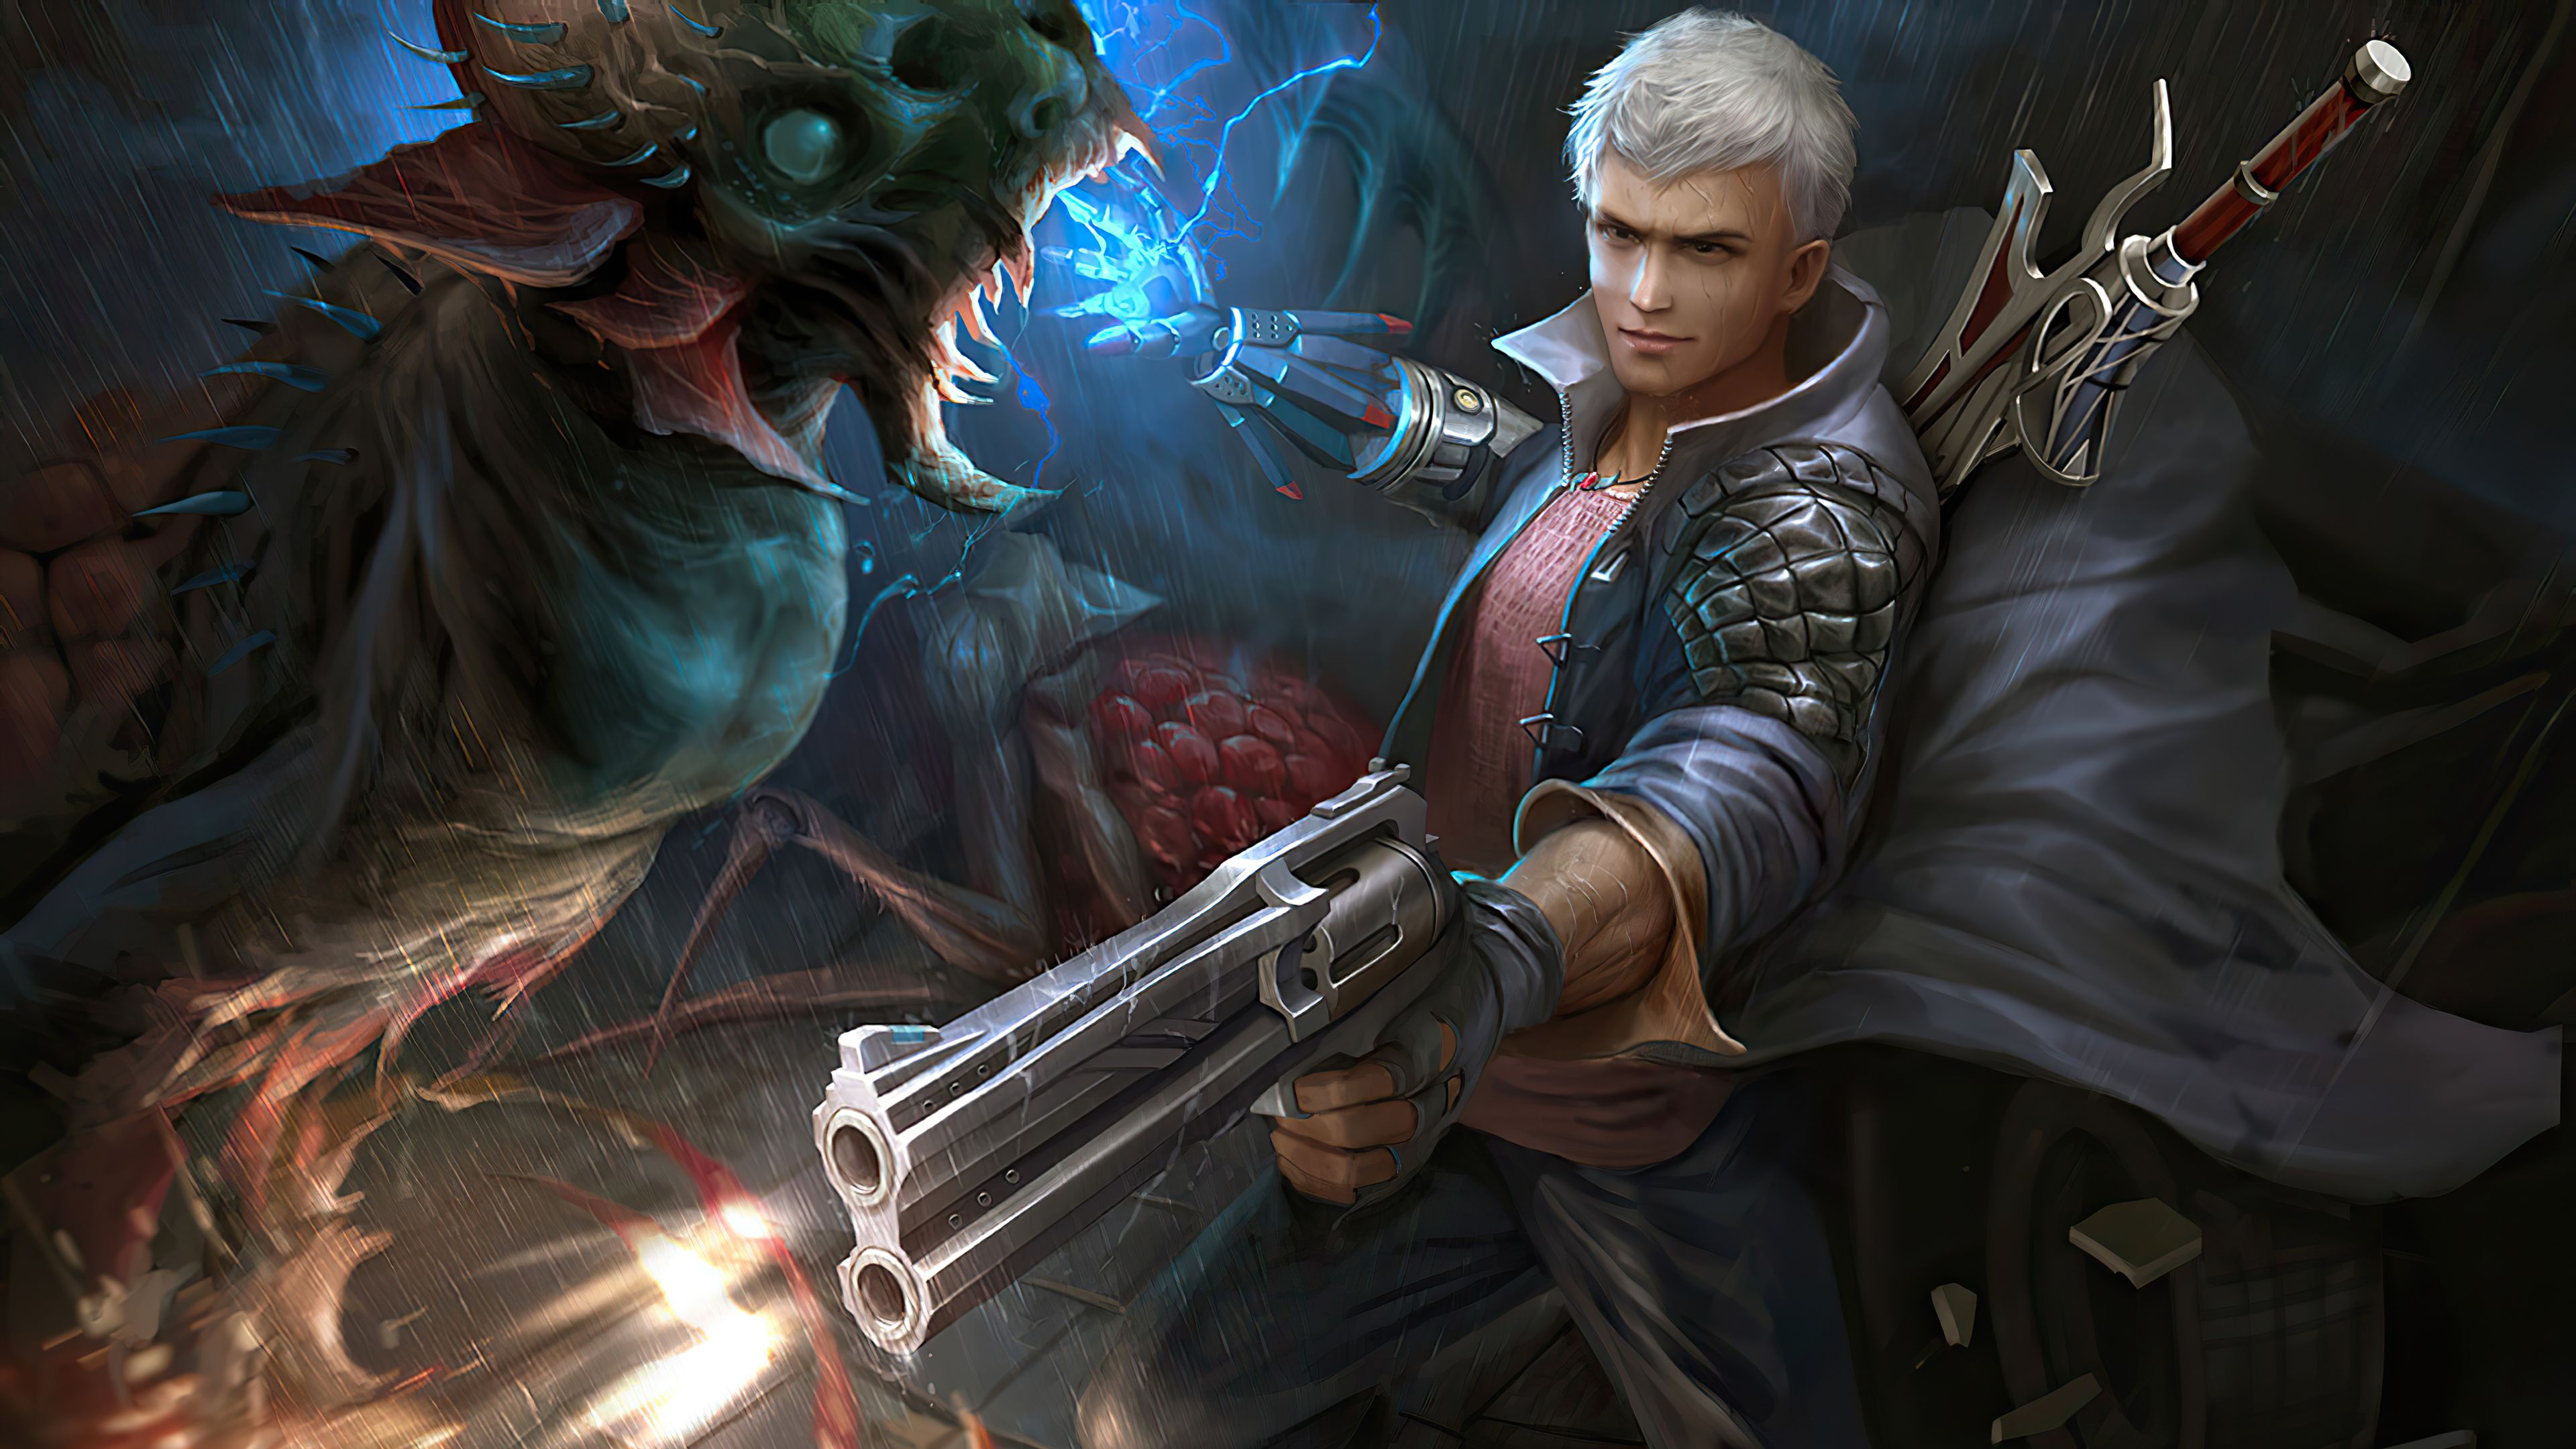 New Devil May Cry 5 Art Wallpaper, HD Games 4K Wallpaper, Image, Photo and Background